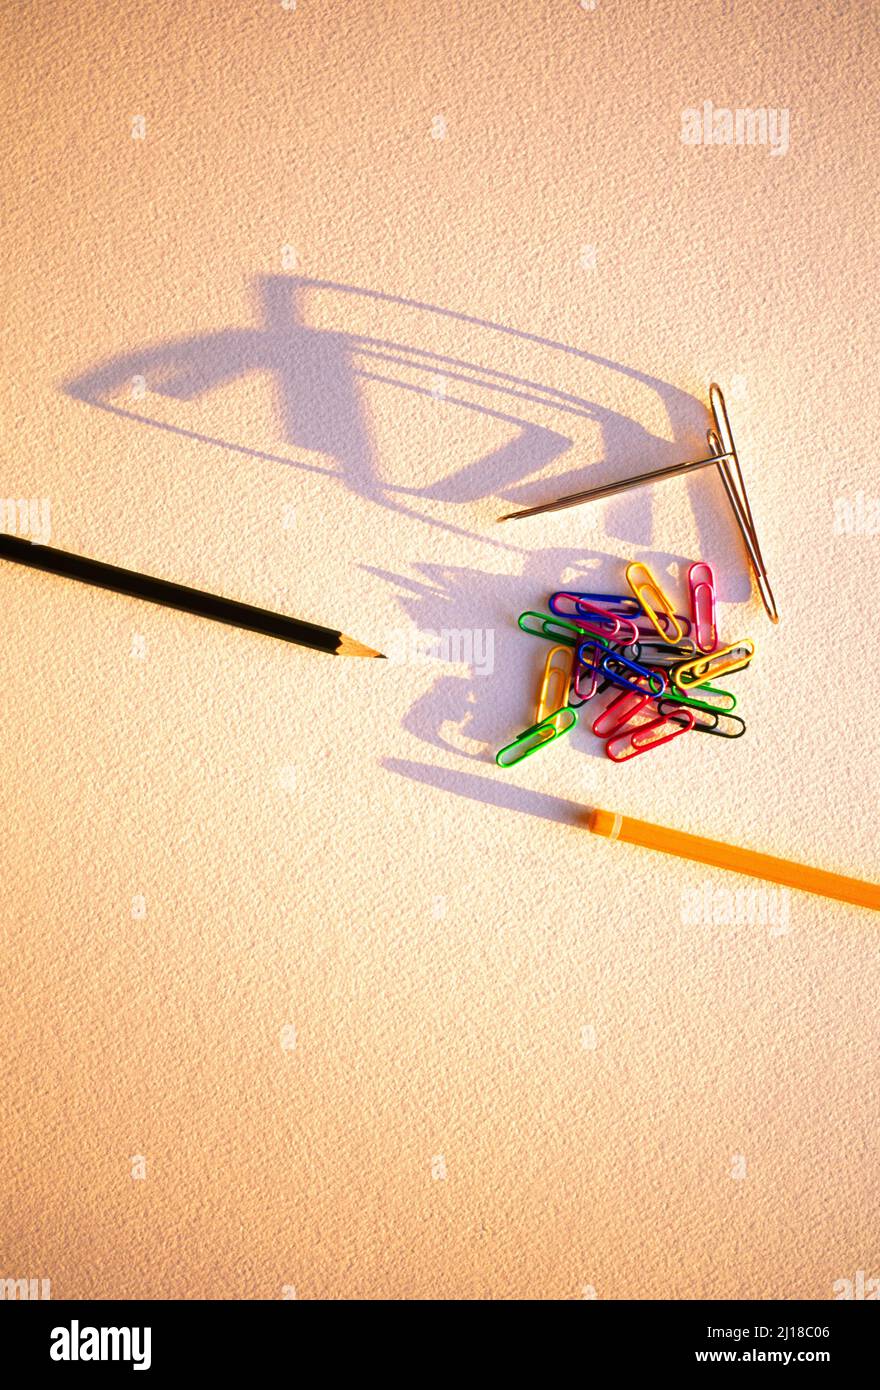 pencils, and paper clips, Stock Photo